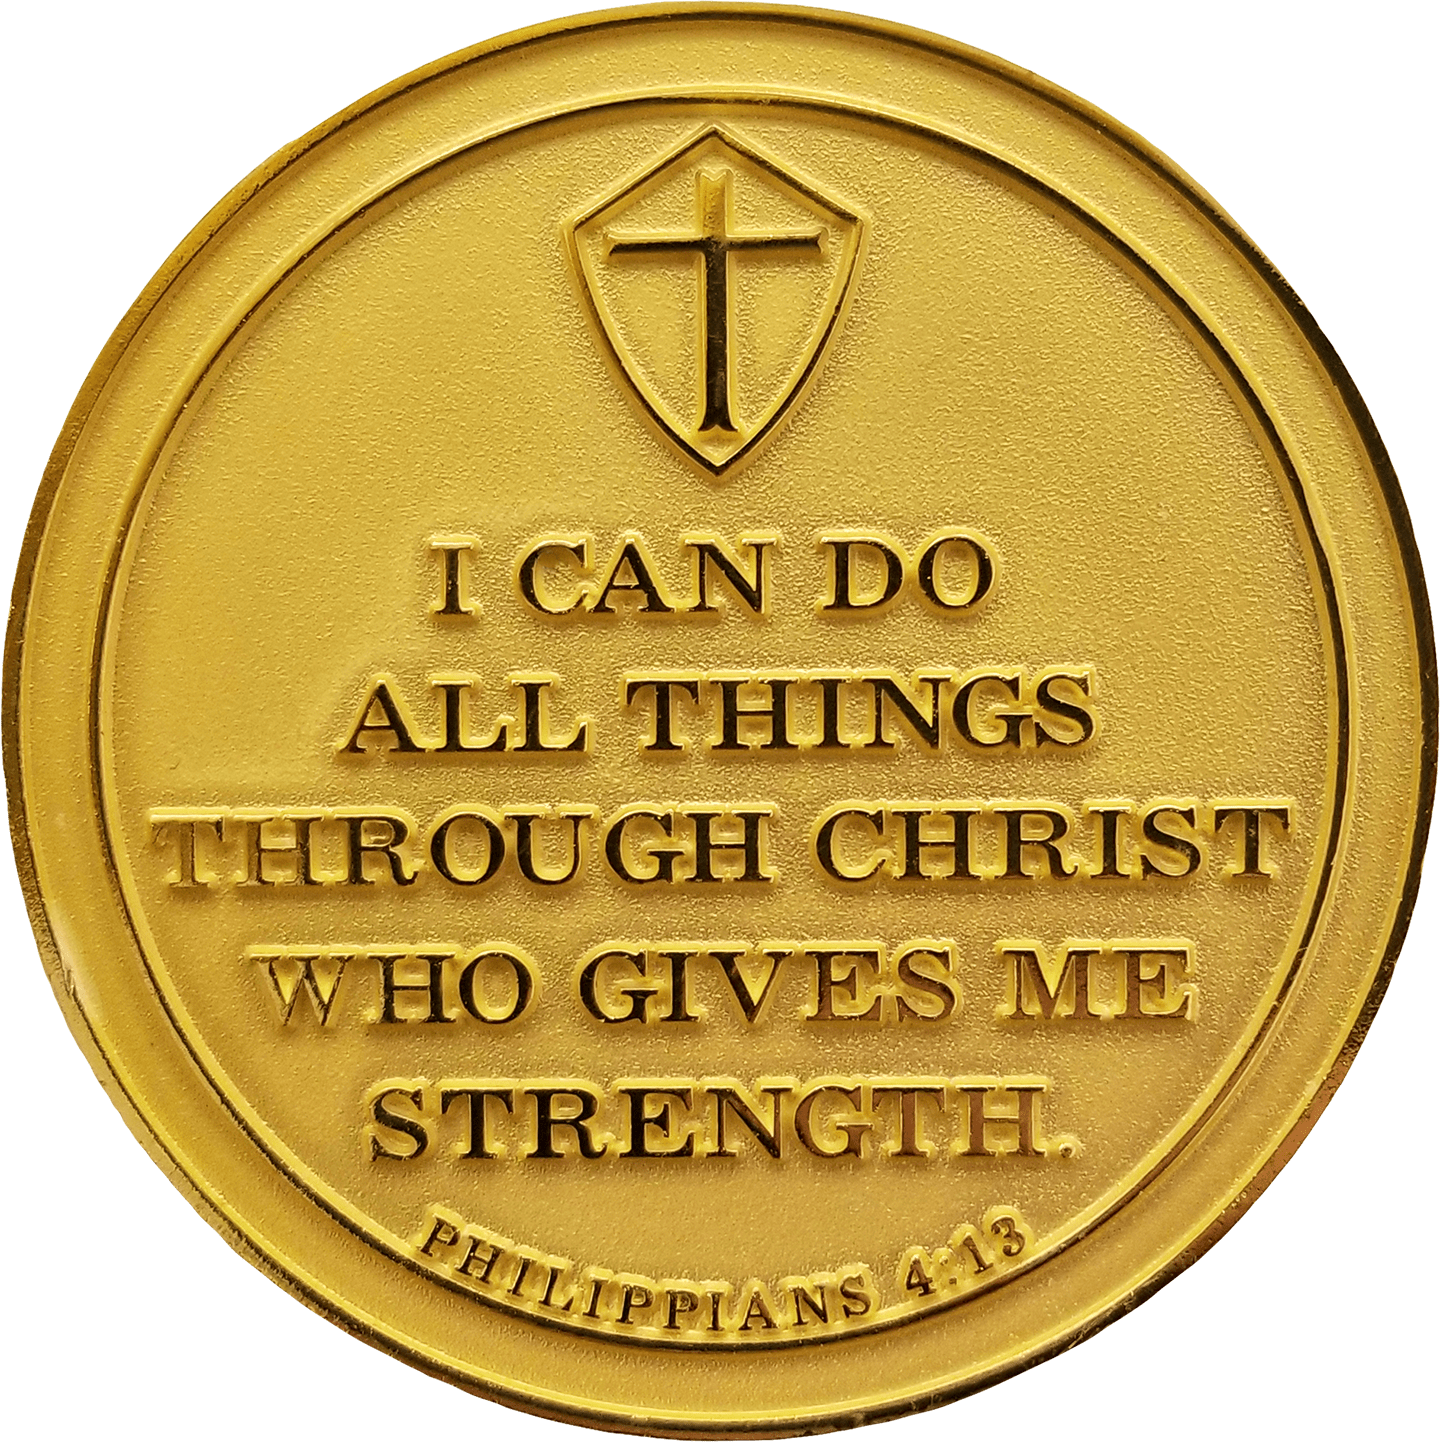  Back: "I can do all things through Christ who gives me strength. Philippians 4:13"